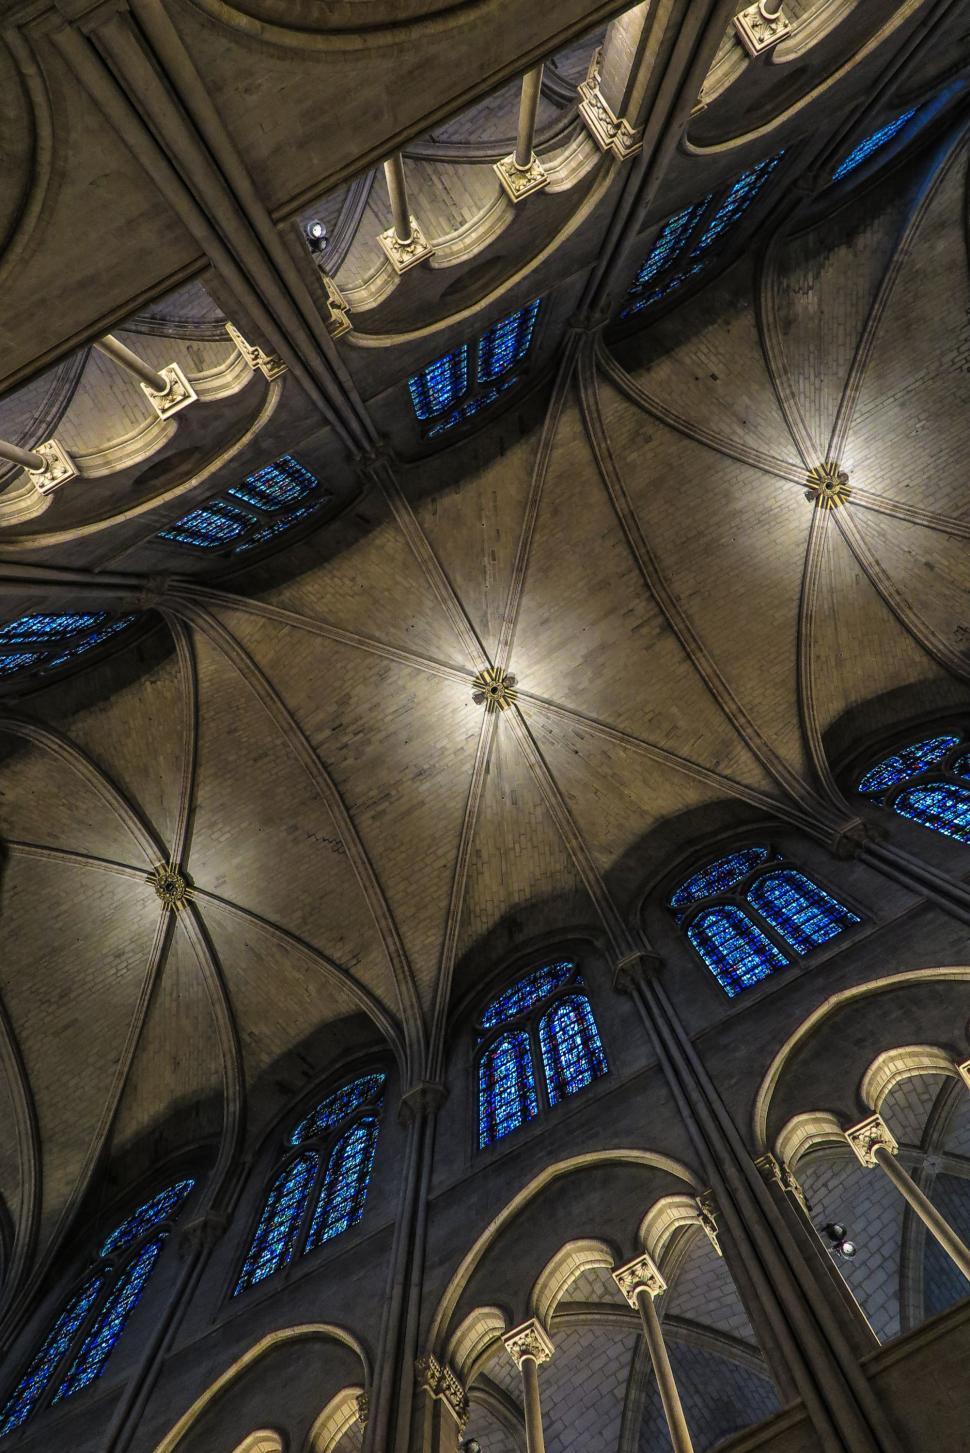 Free Image of Vaulted cathedral ceilings 